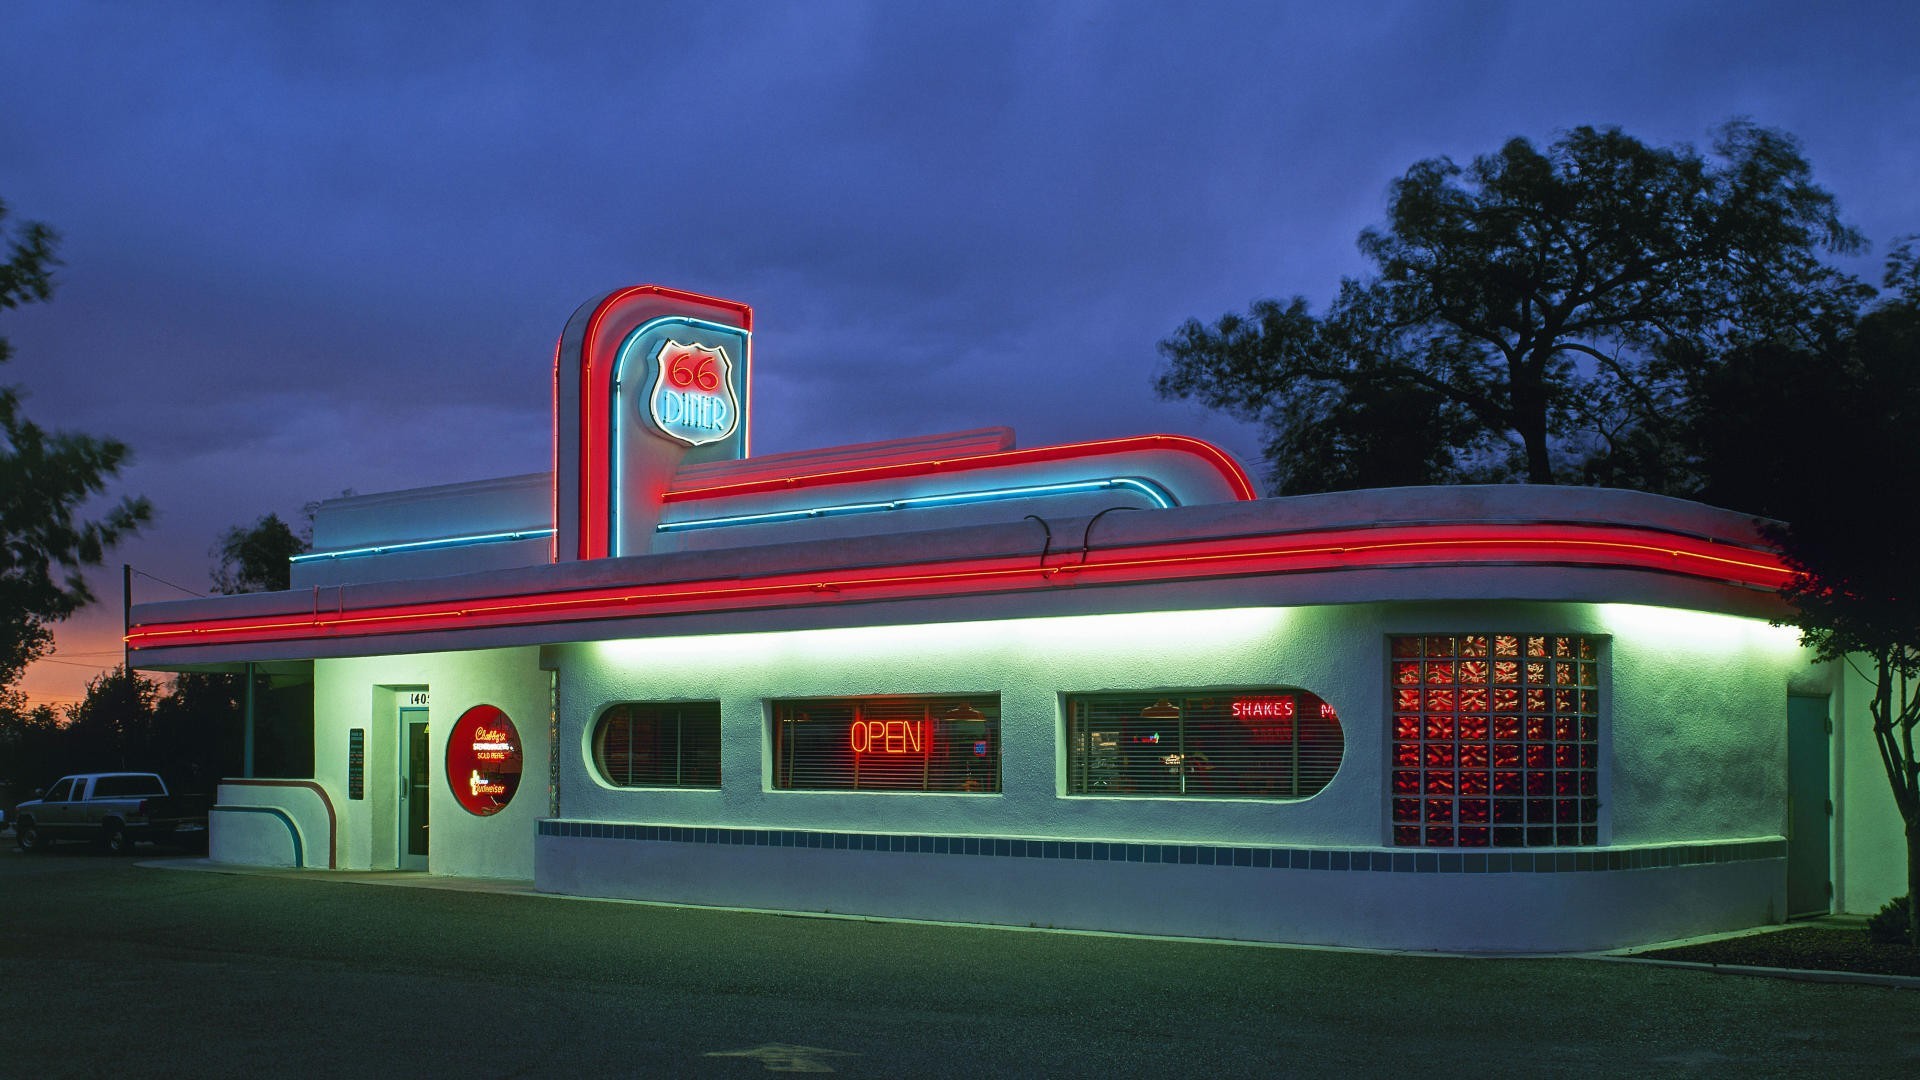 1920x1080 Route 66 California | HD Diner On Route 66 In California Wallpaper